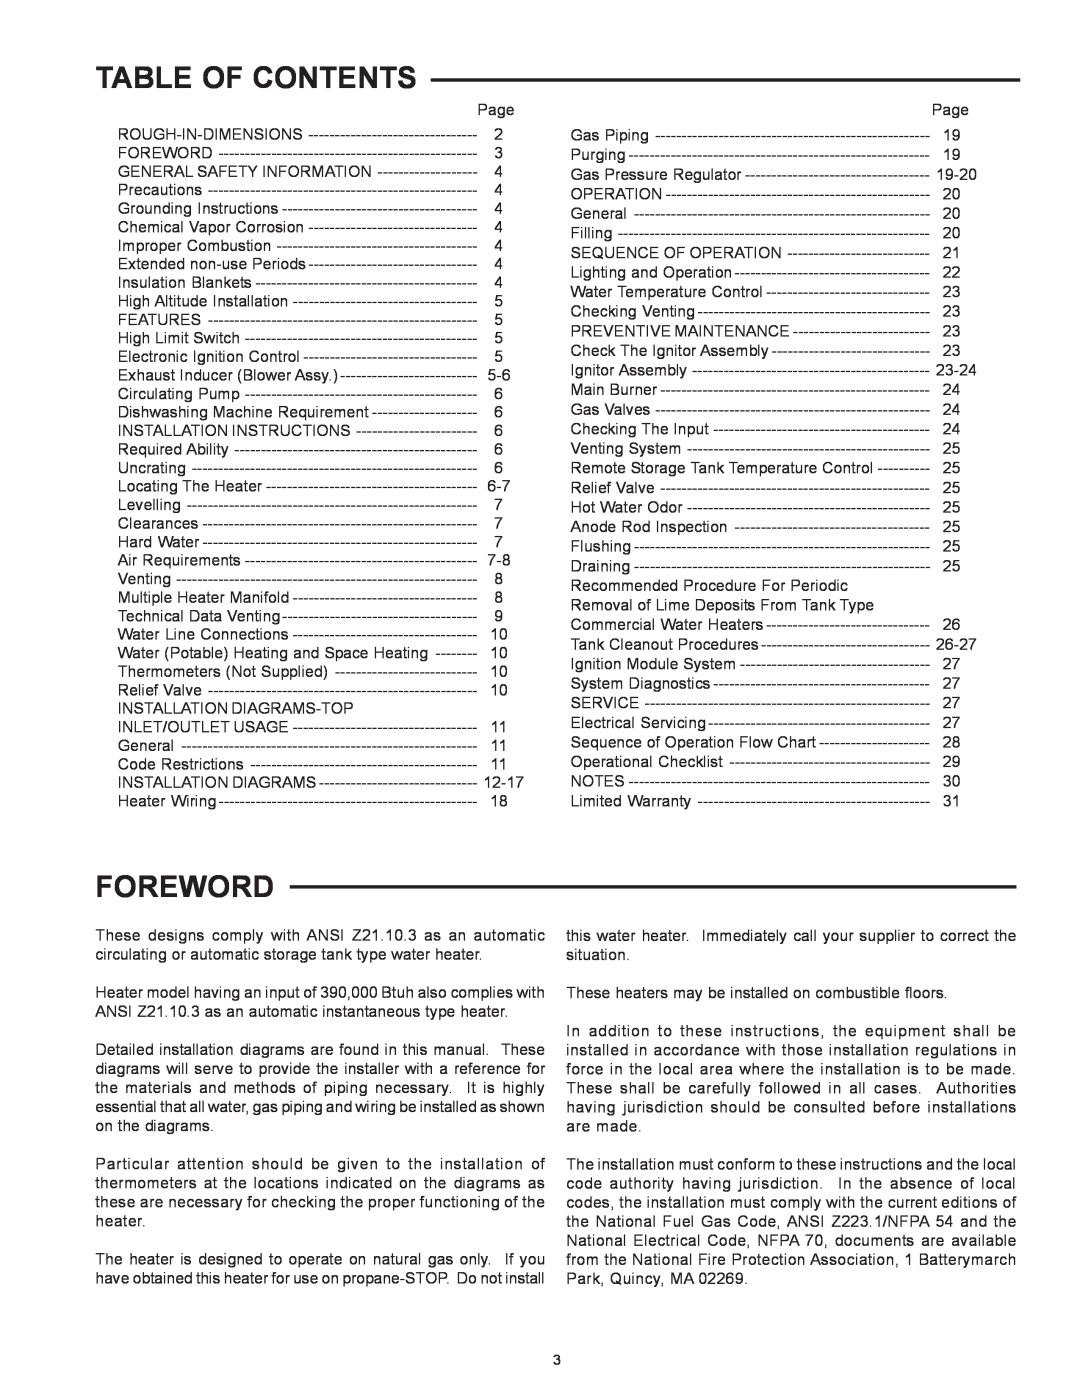 American Water Heater Commercial Gas, Glass-Lined, Tank-Type Water Heater, BCG3-80T150-6NOX Table Of Contents, Foreword 